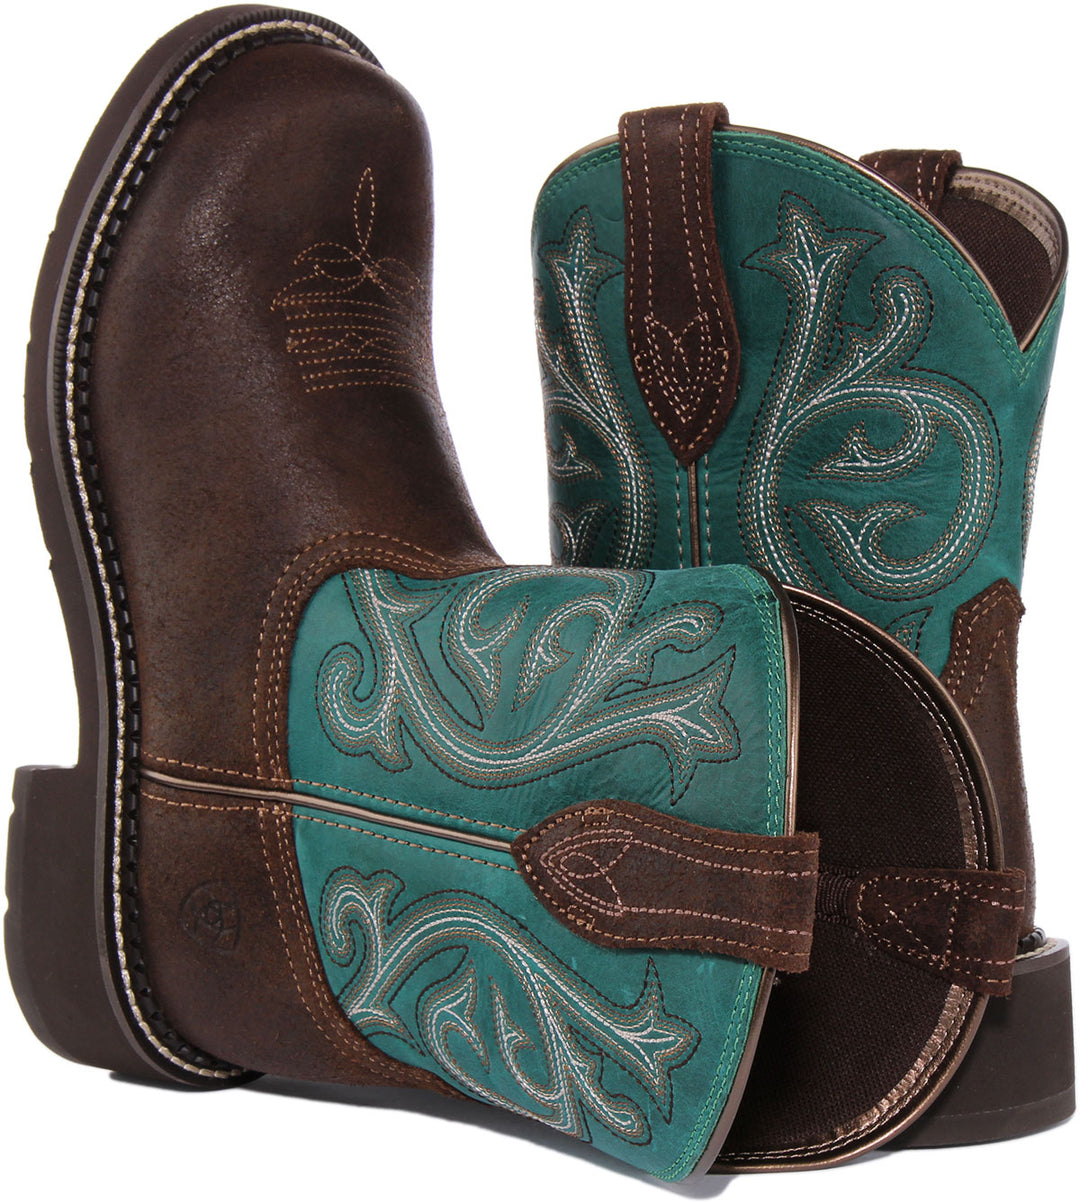 Ariat Fatbaby In Brown For Women